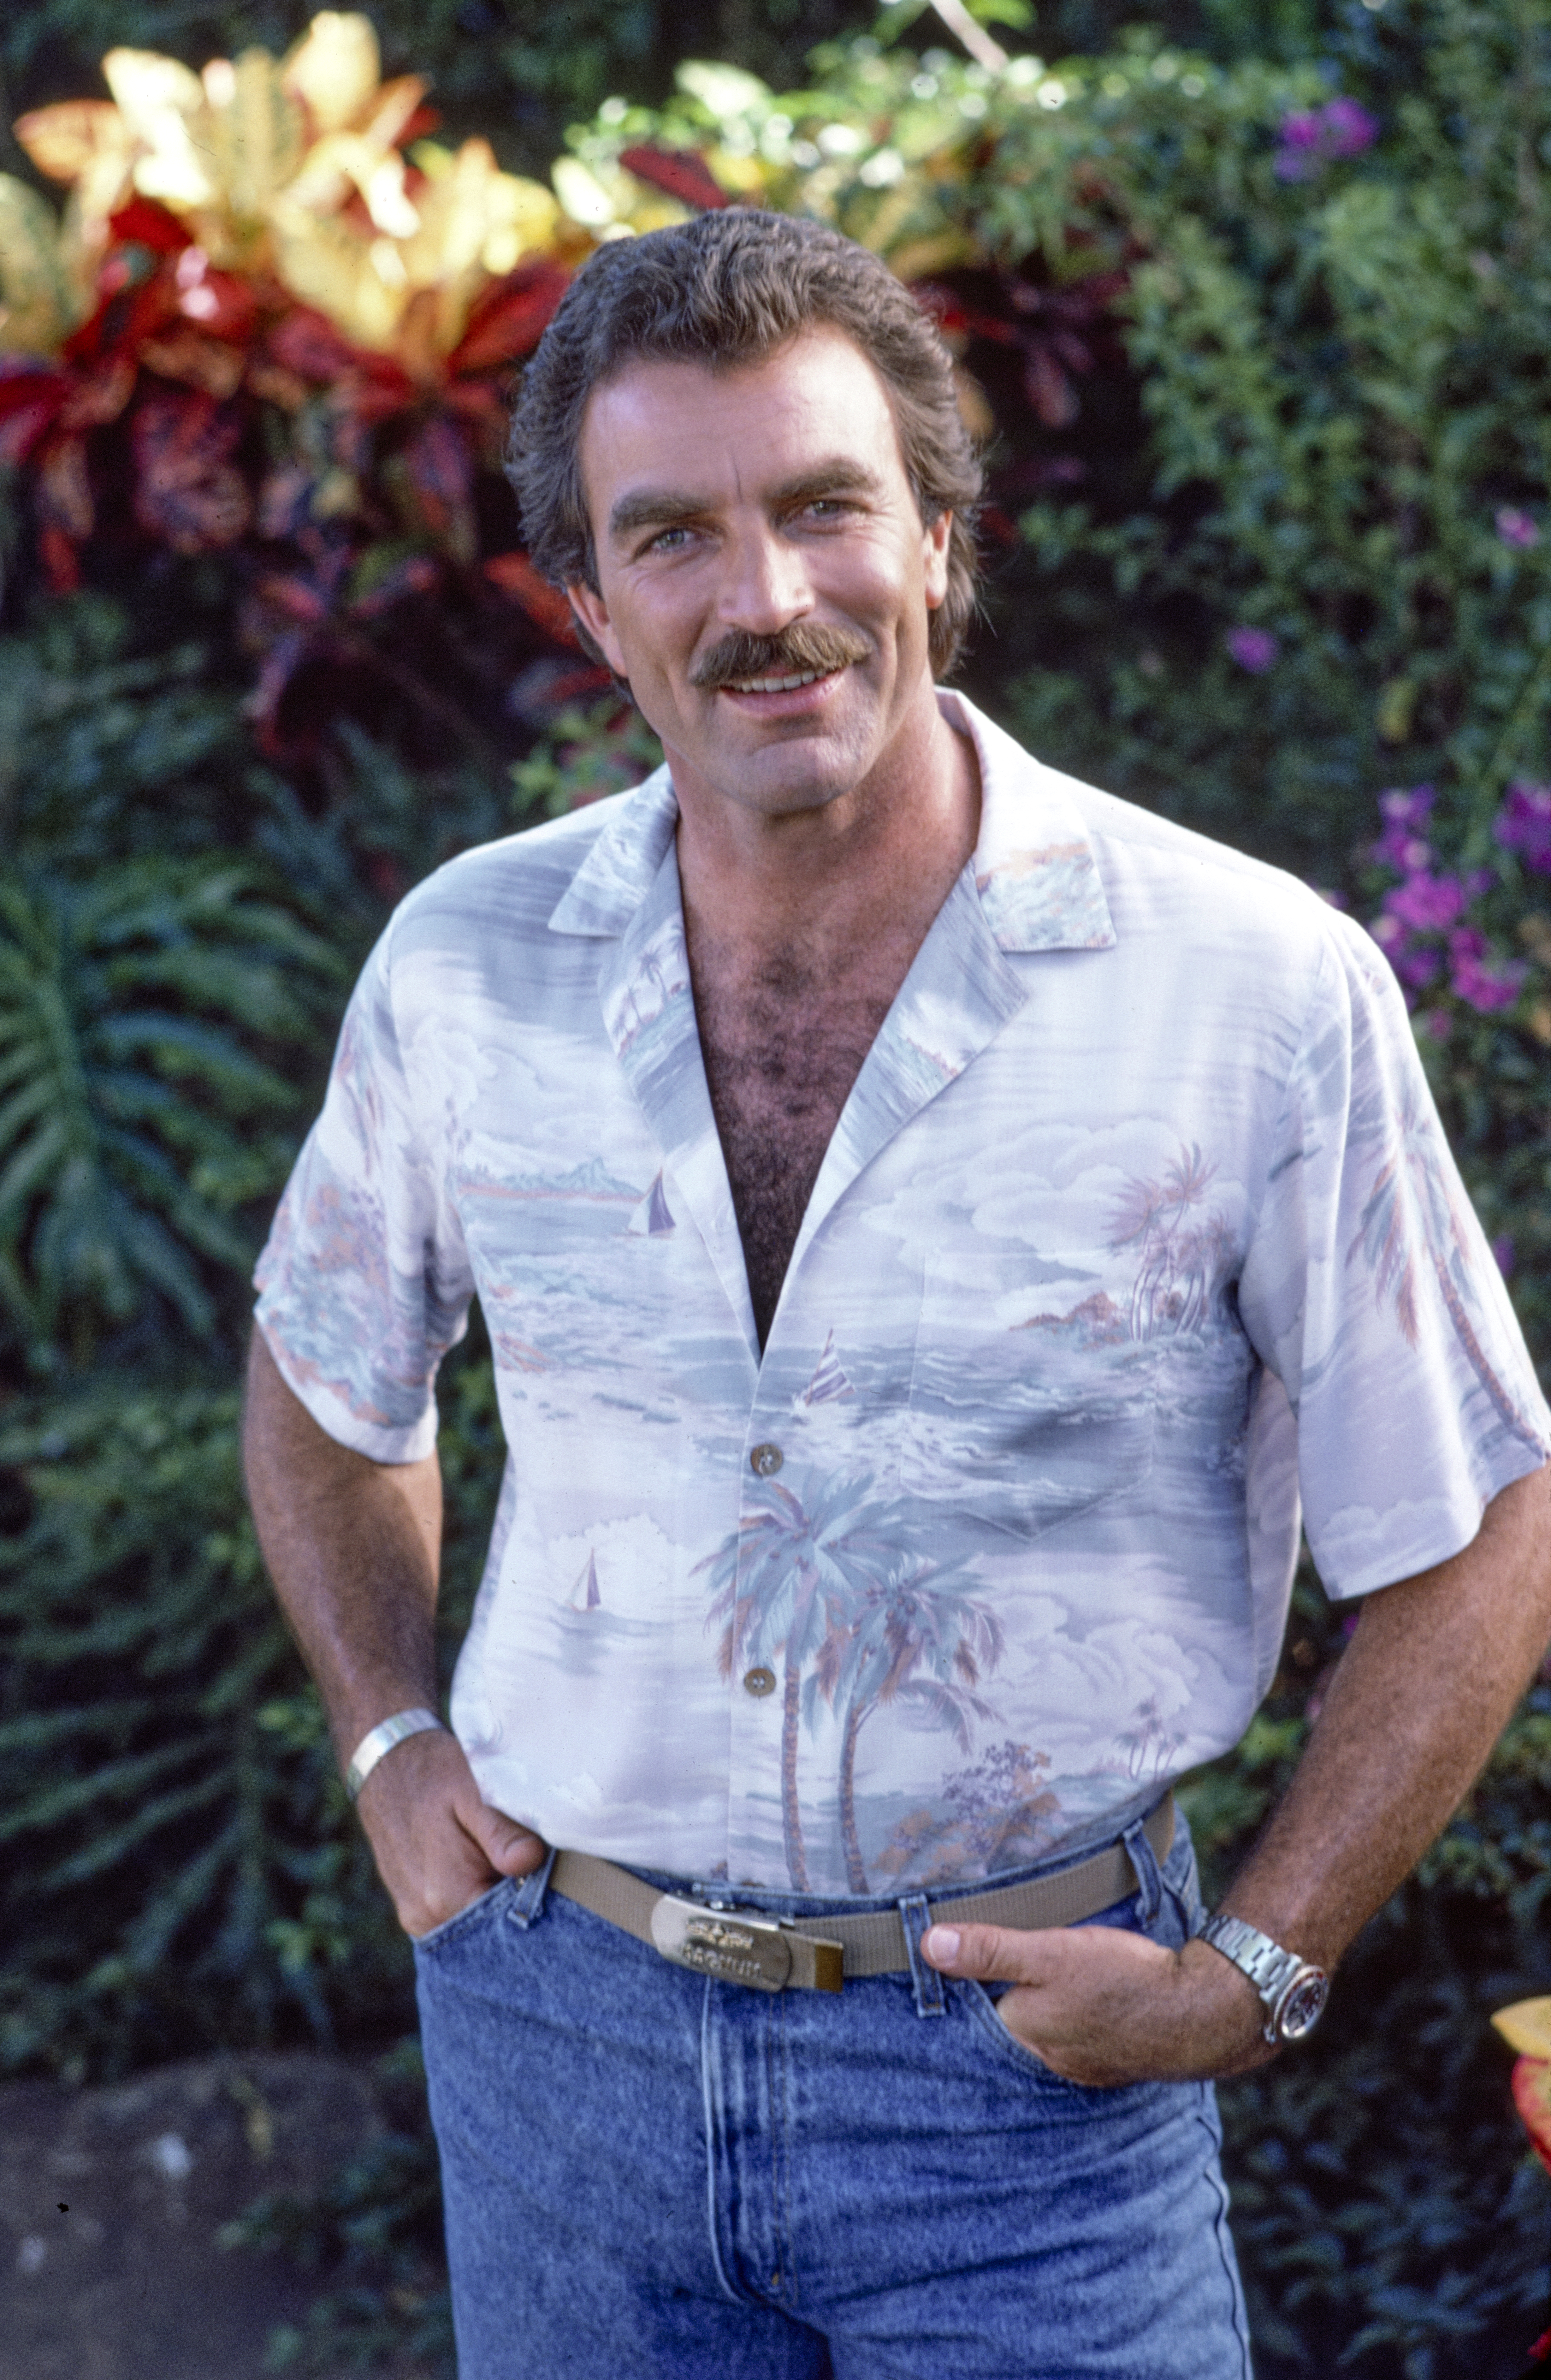 Tom Selleck as Magnum in the television show, "Magnum P.I.," circa 1985 | Source: Getty Images